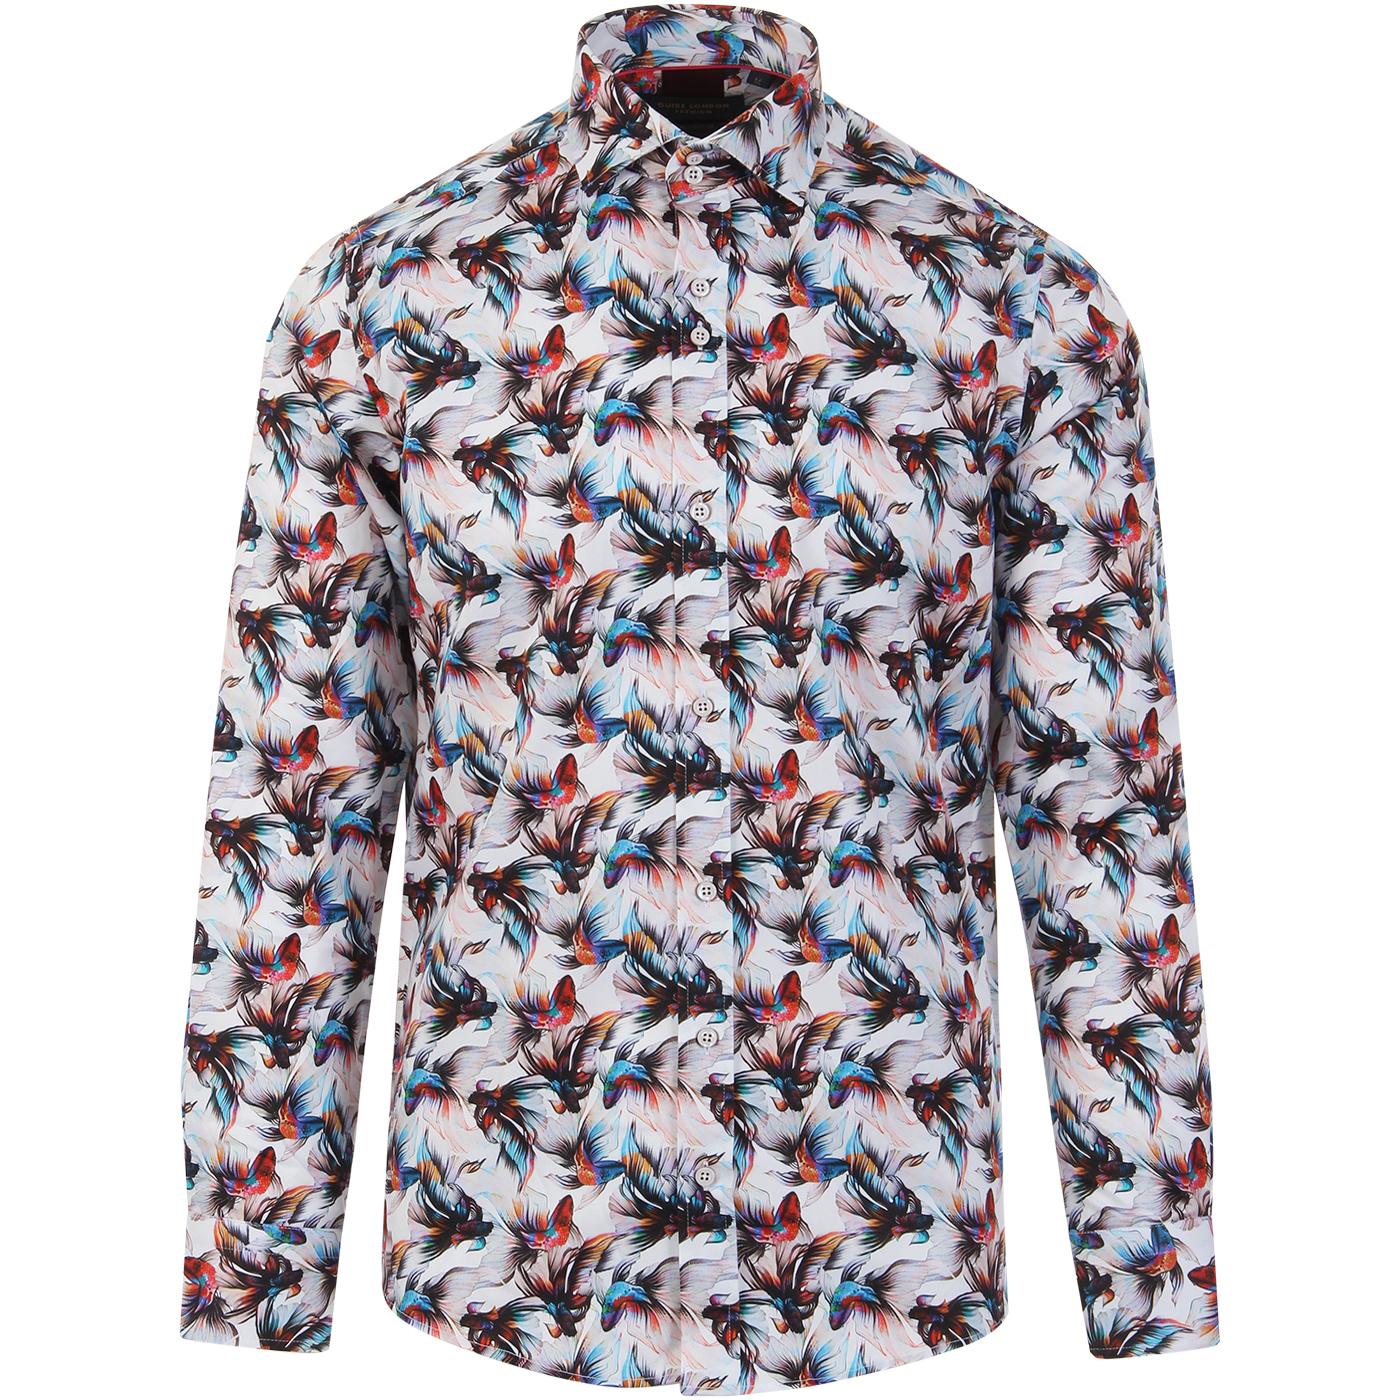 GUIDE LONDON 60s Mod Psychedelic Fish Print Shirt